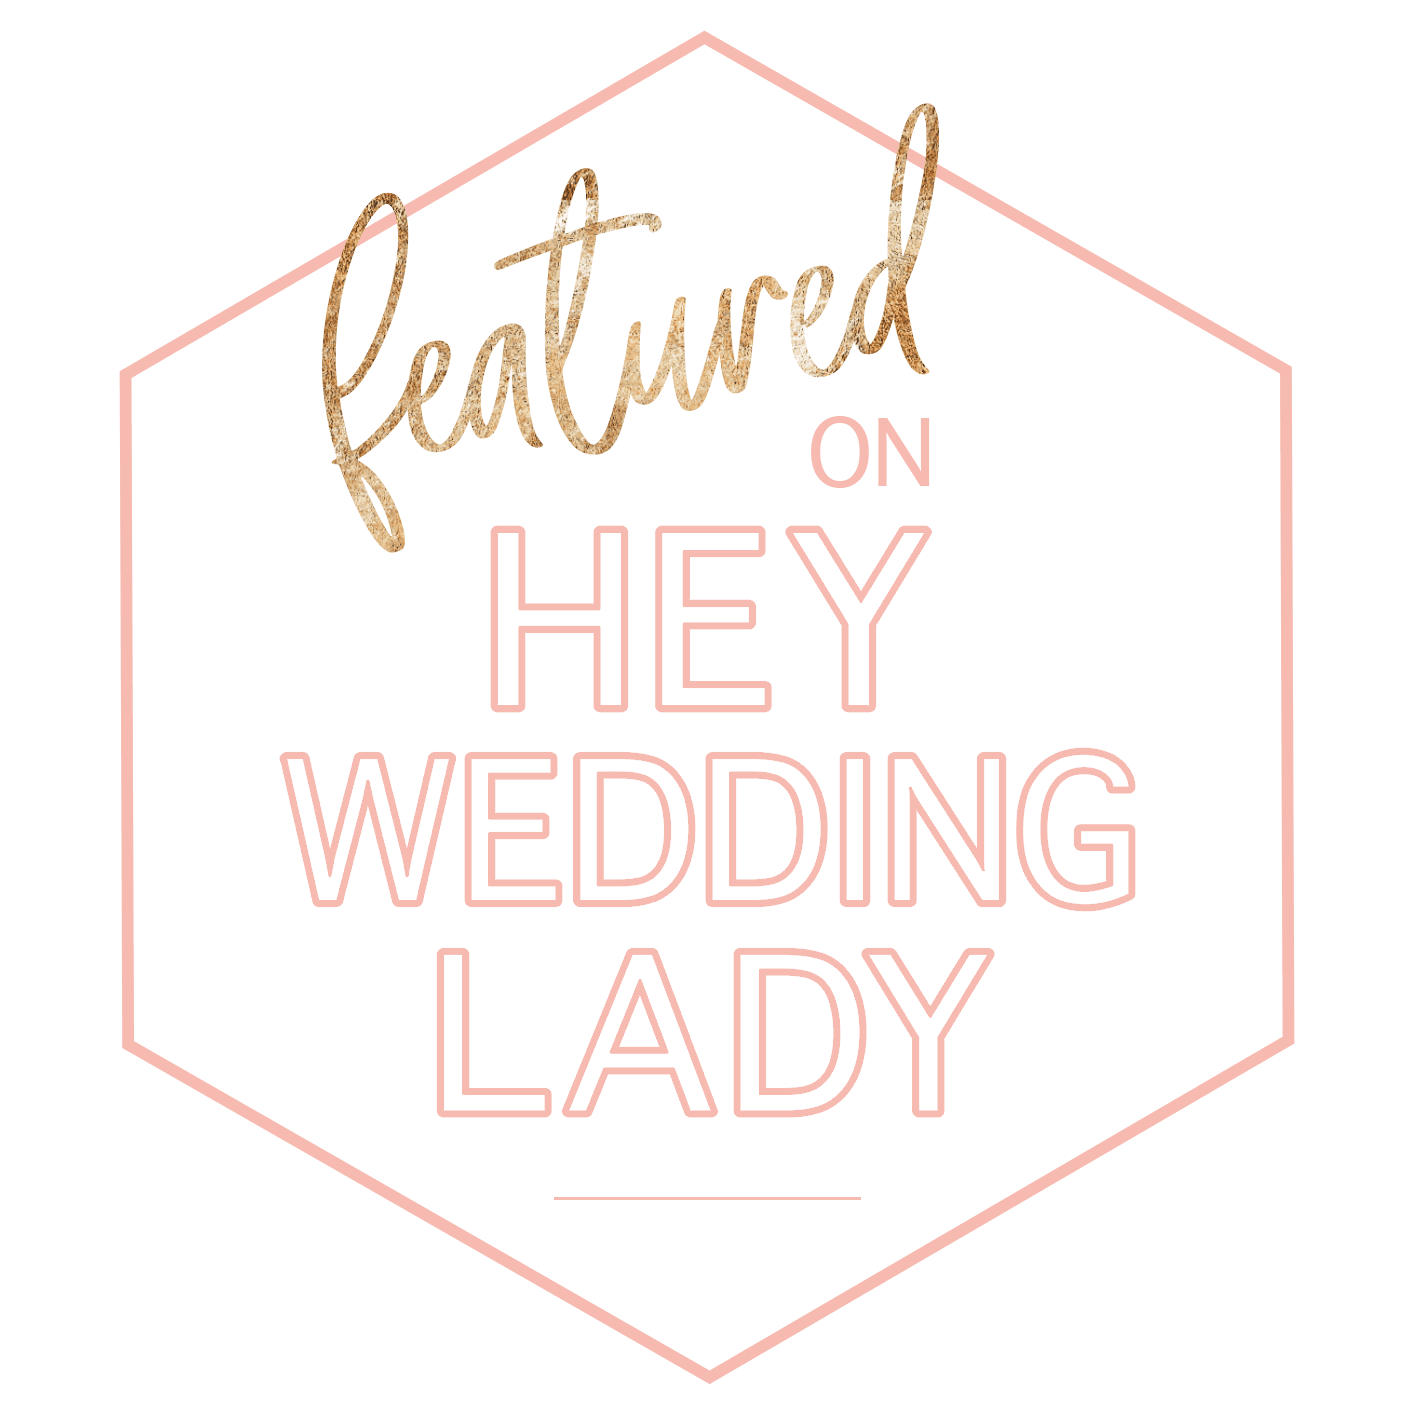 91d9e89a2c5489997fdb9a4f06db938d.hey-wedding-lady-featured-badge.png